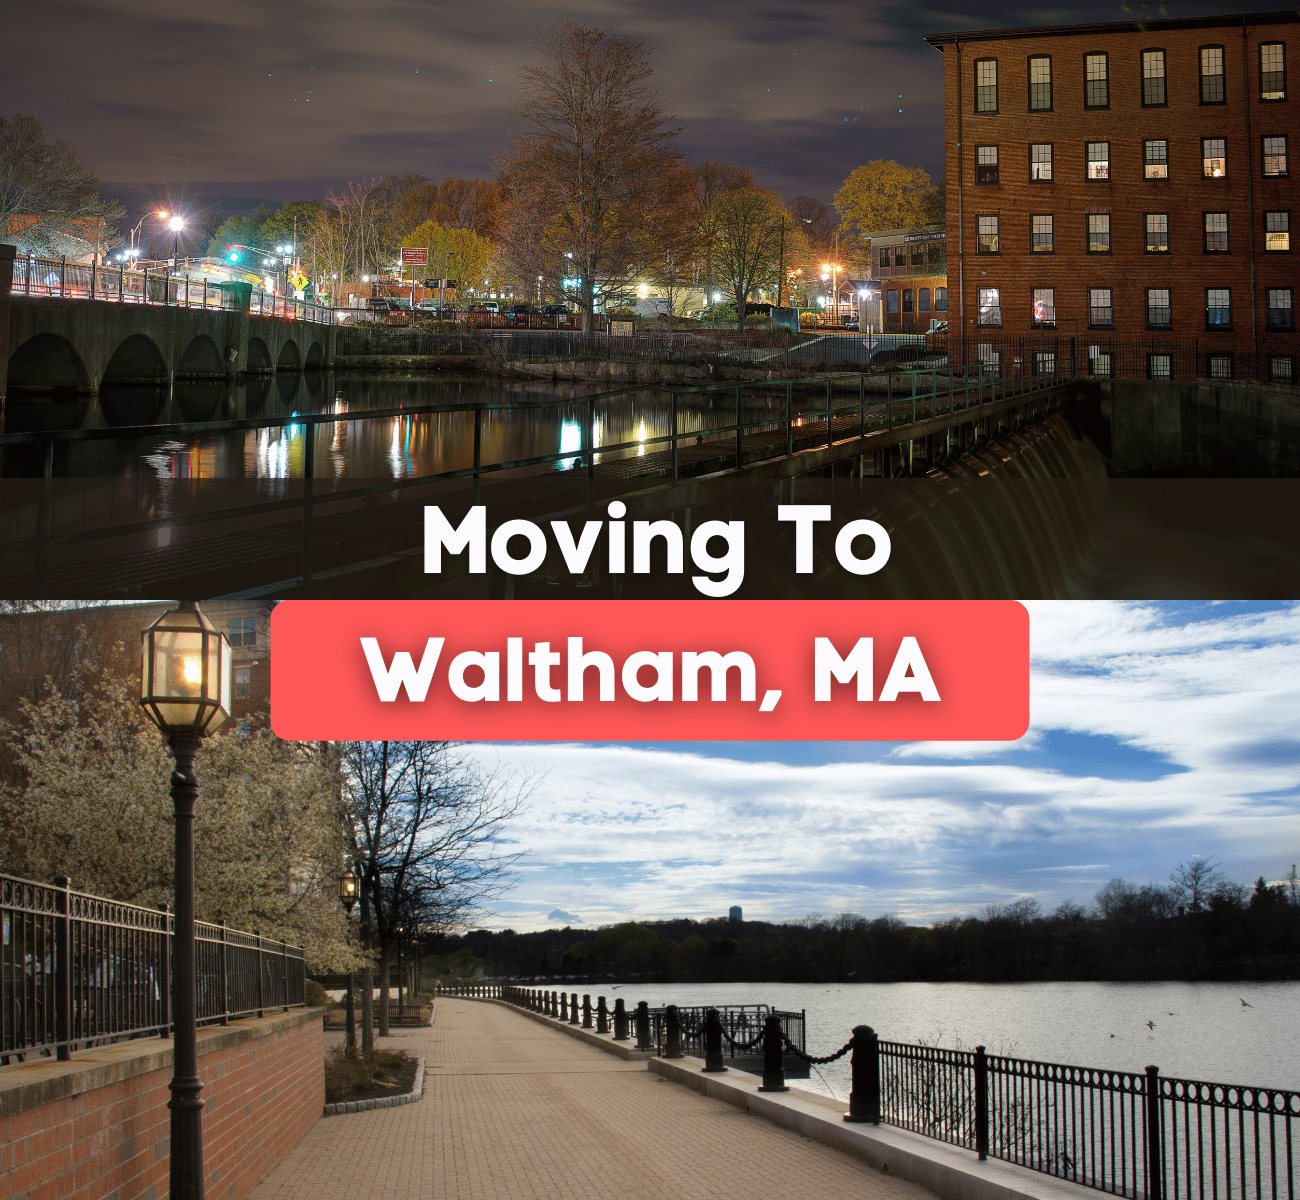 moving to Waltham, MA graphic with charles river at night and waterfront views 